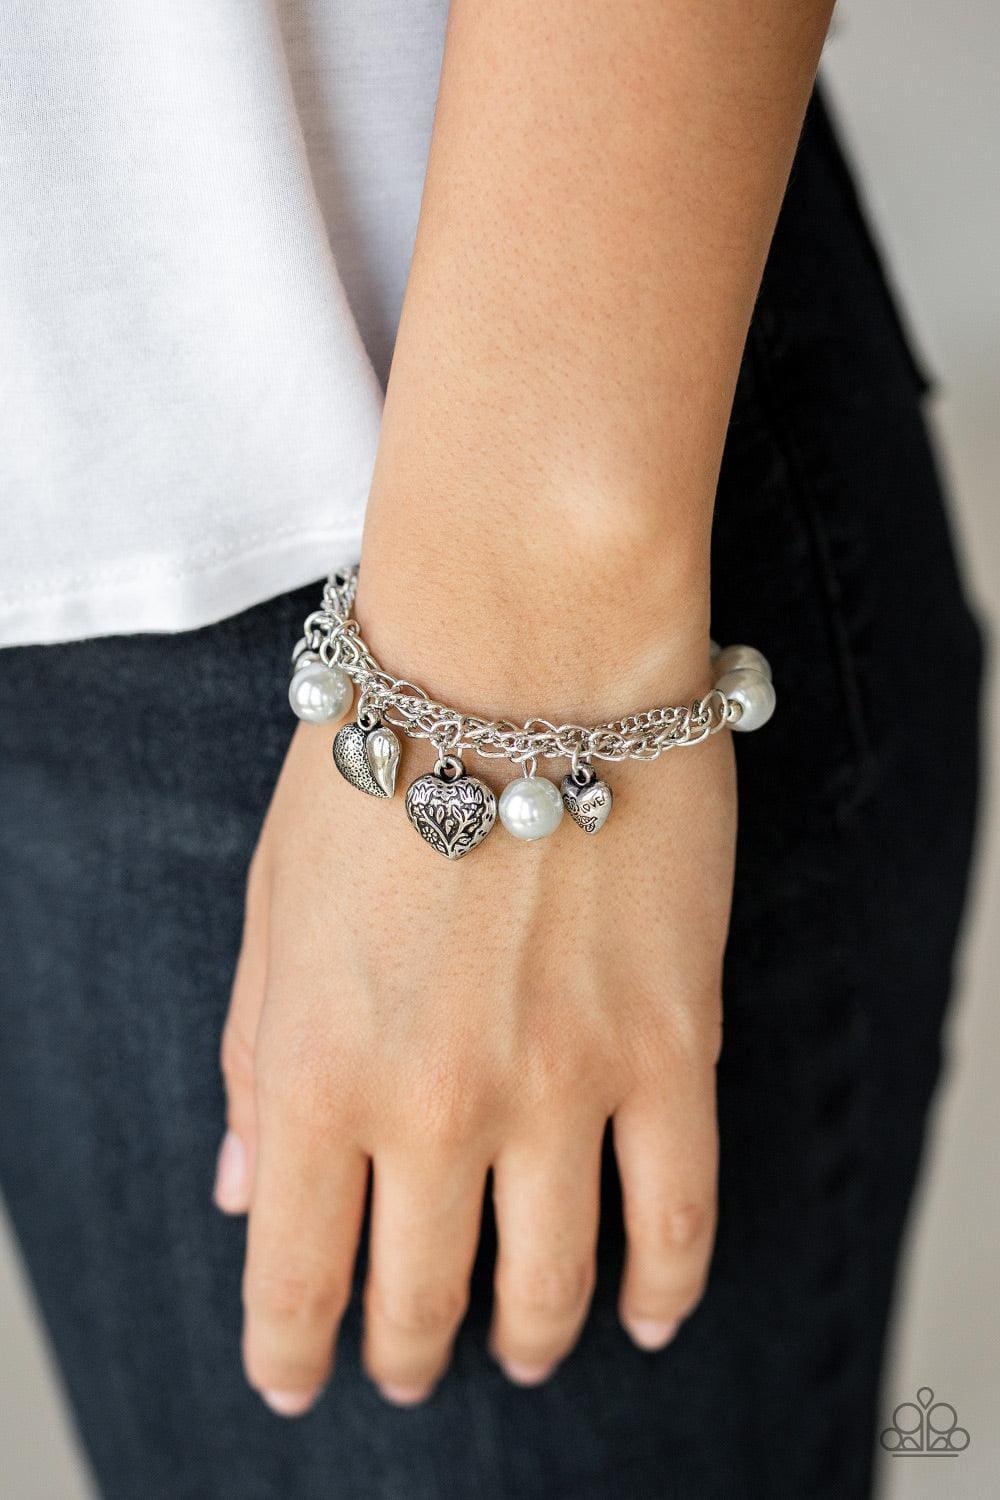 Paparazzi Accessories - More Amour - Silver Bracelet - Bling by JessieK